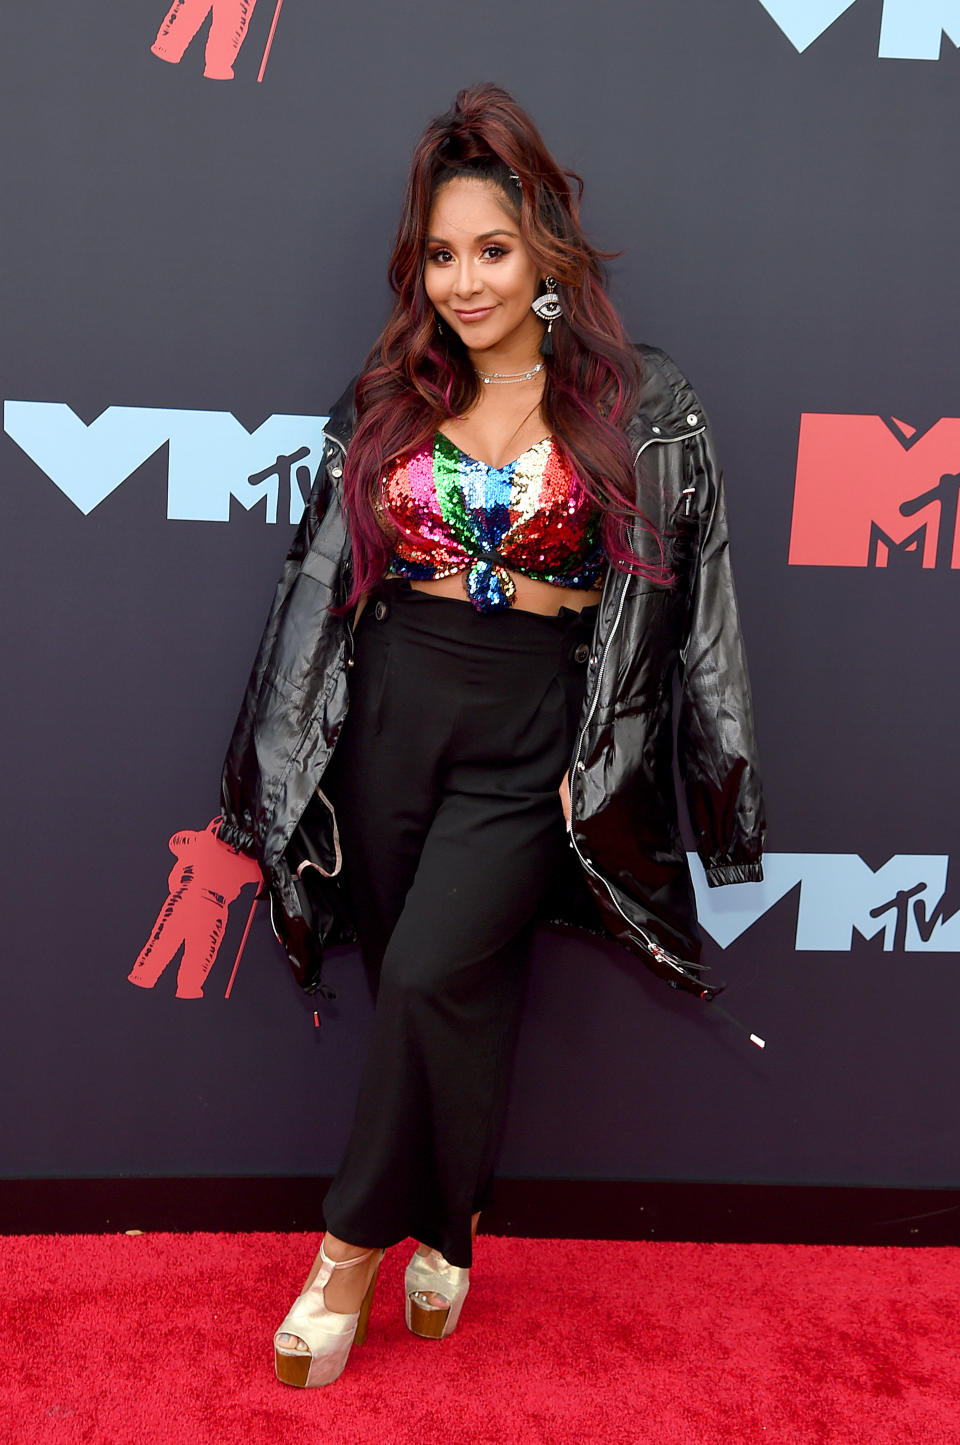 NEWARK, NEW JERSEY - AUGUST 26: Nicole "Snooki" Polizzi attends the 2019 MTV Video Music Awards at Prudential Center on August 26, 2019 in Newark, New Jersey. (Photo by Jamie McCarthy/Getty Images for MTV)